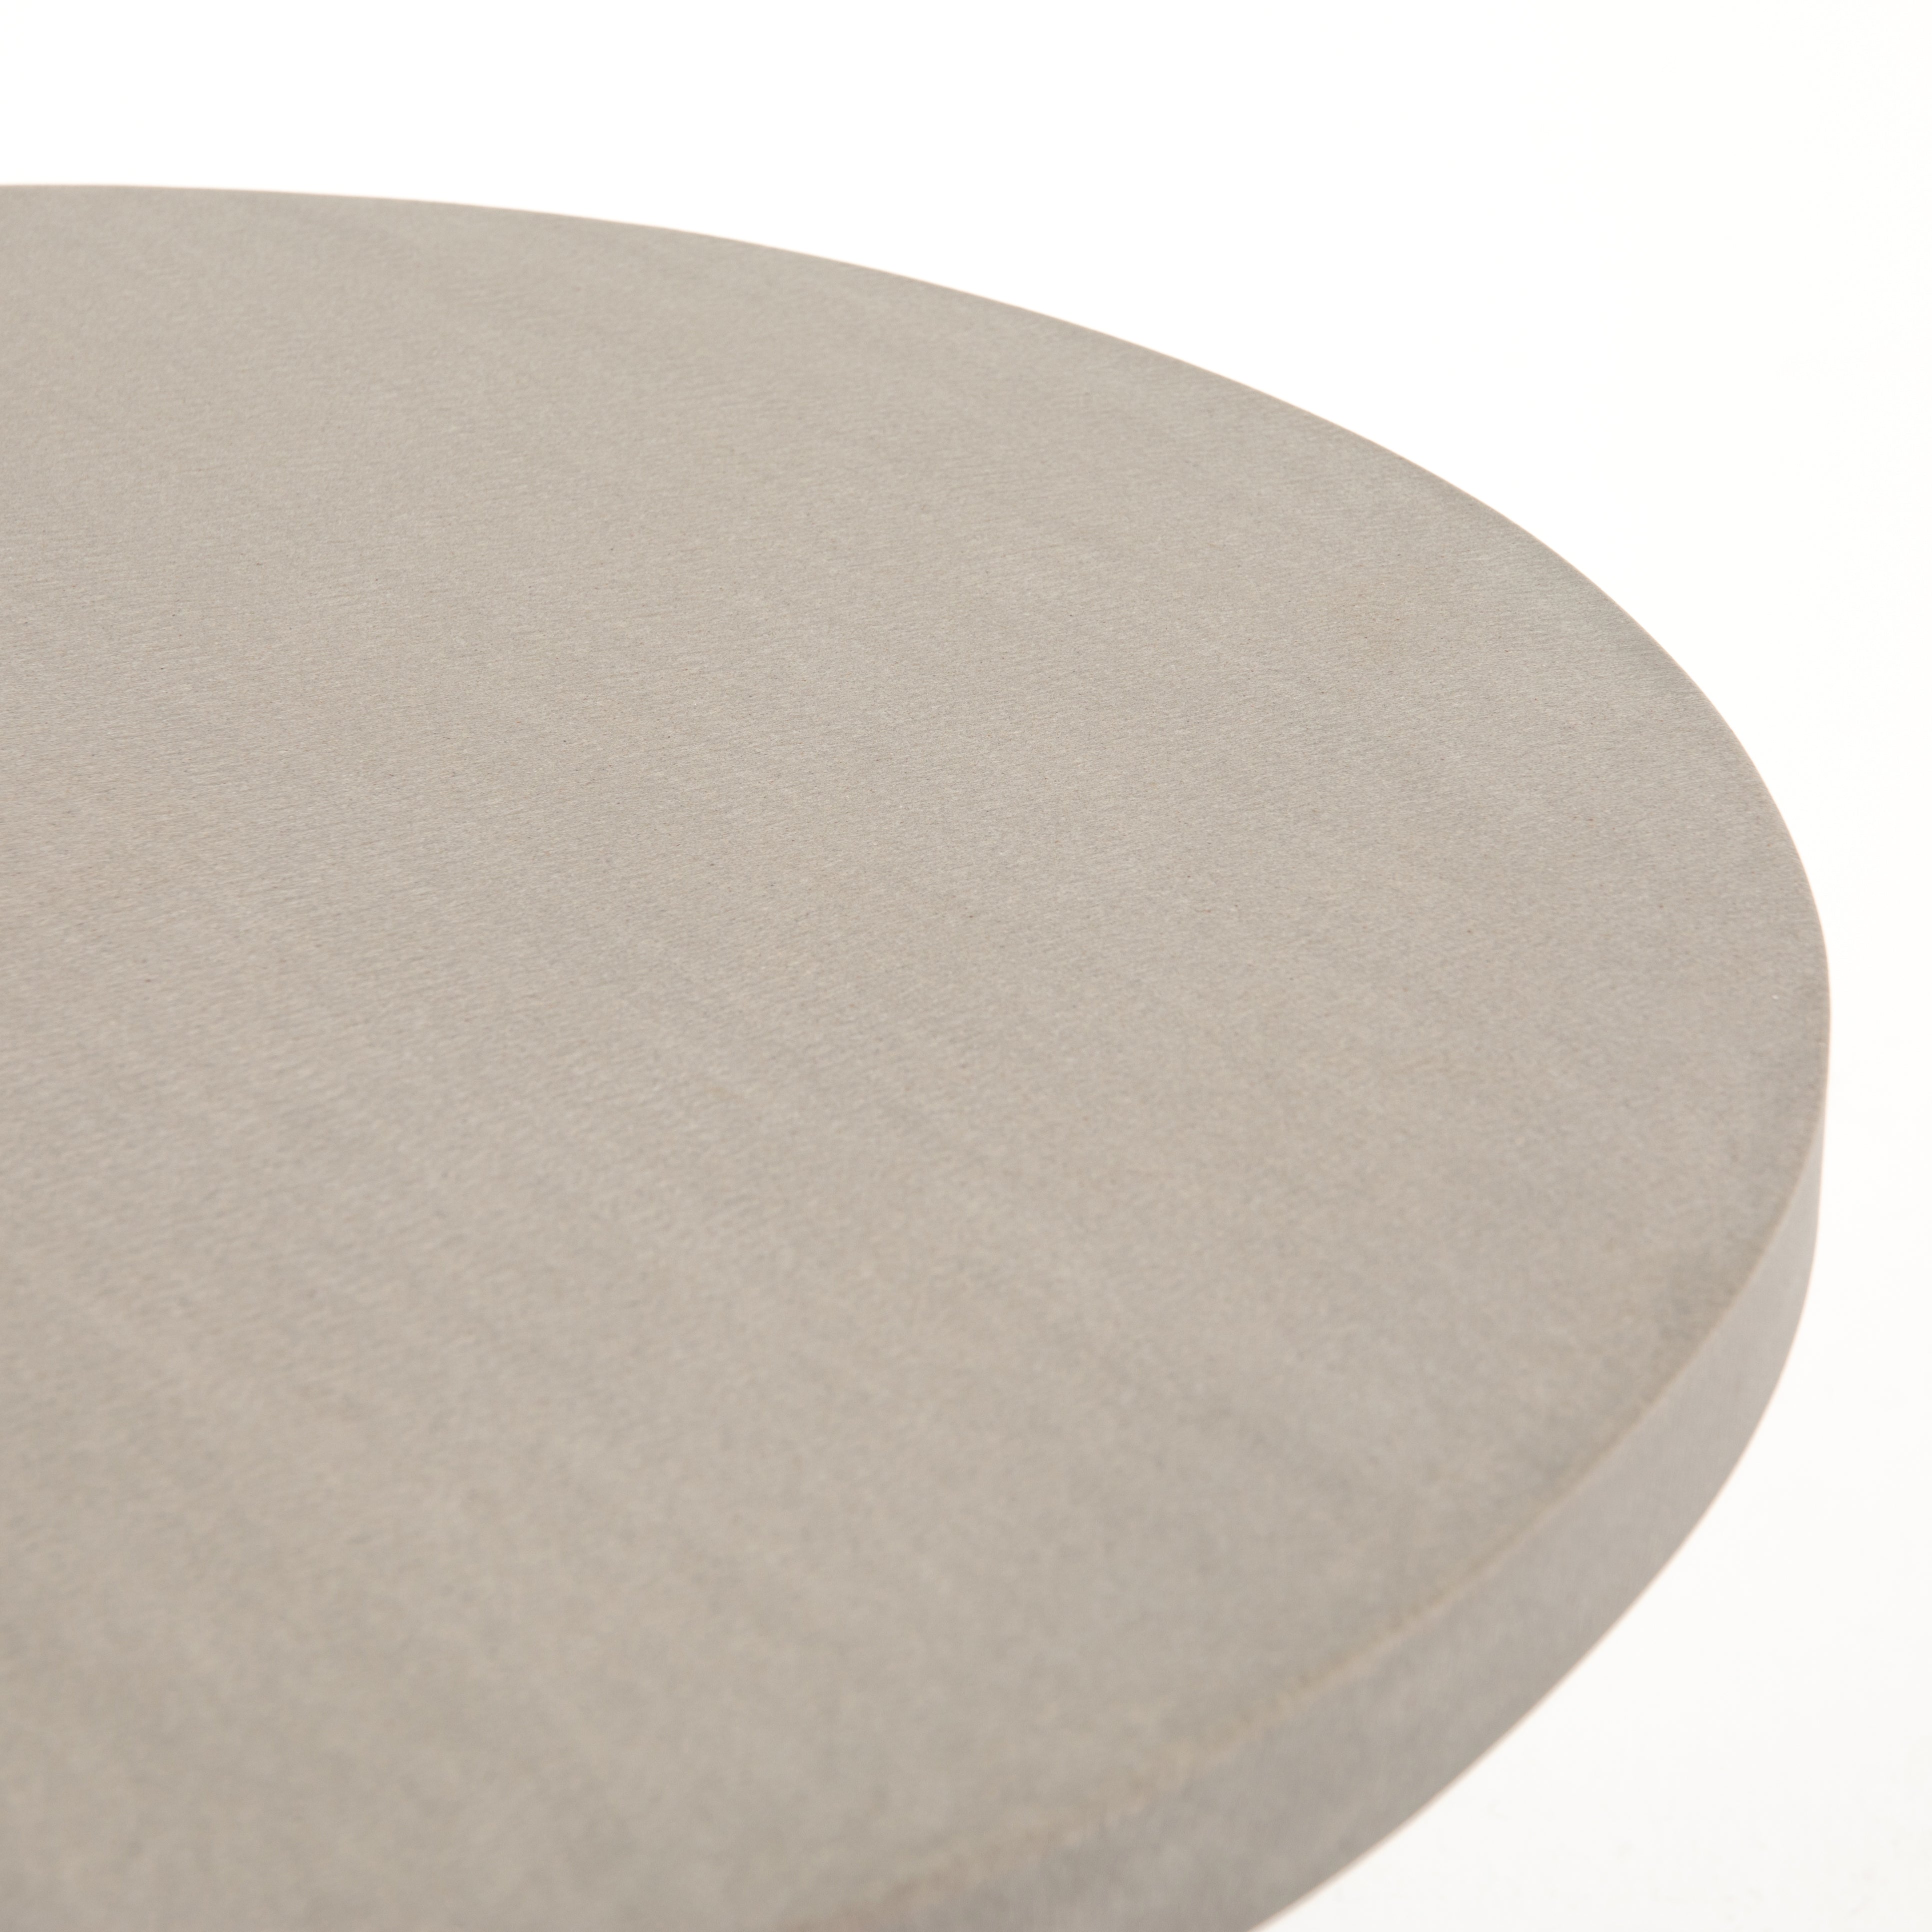 Cyrus Round Coffee Table